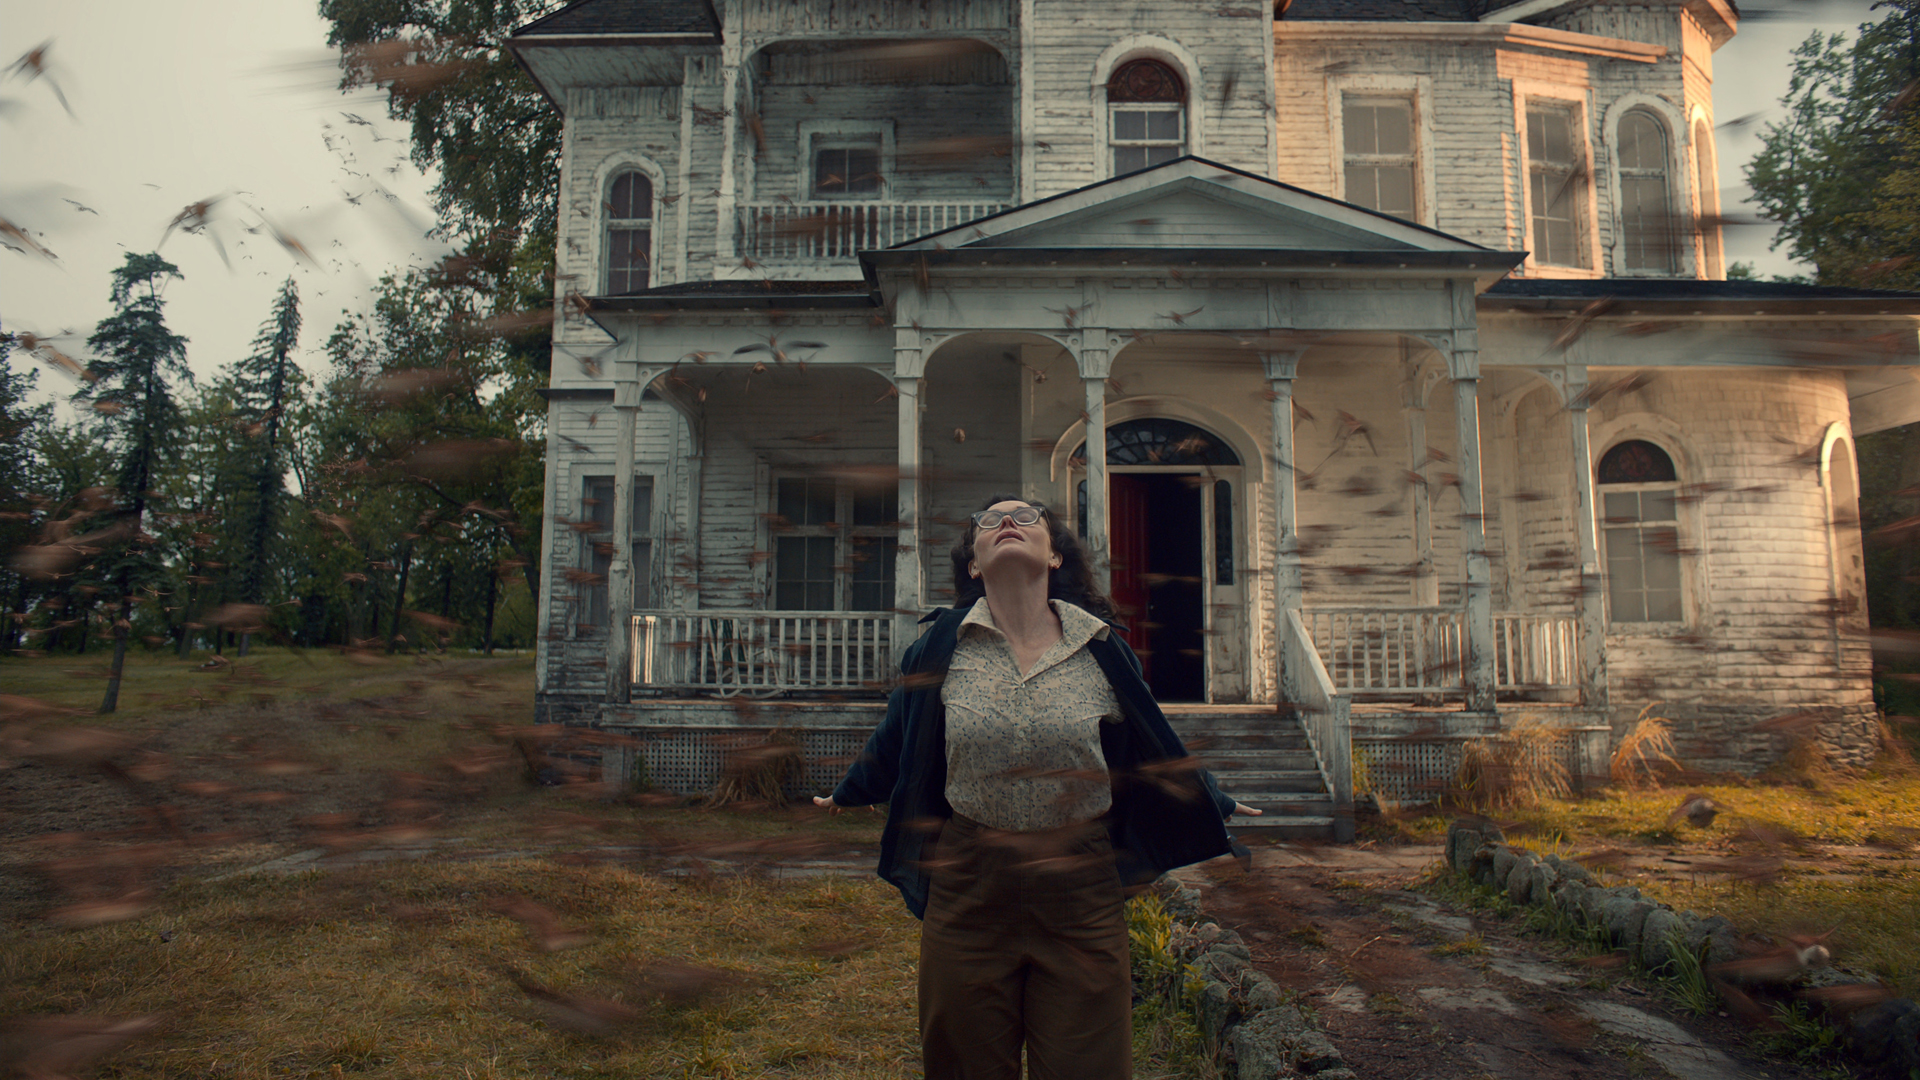 Nancy Bradley stands outside her house as a fierce wind hits her in The Murmuring on Netflix